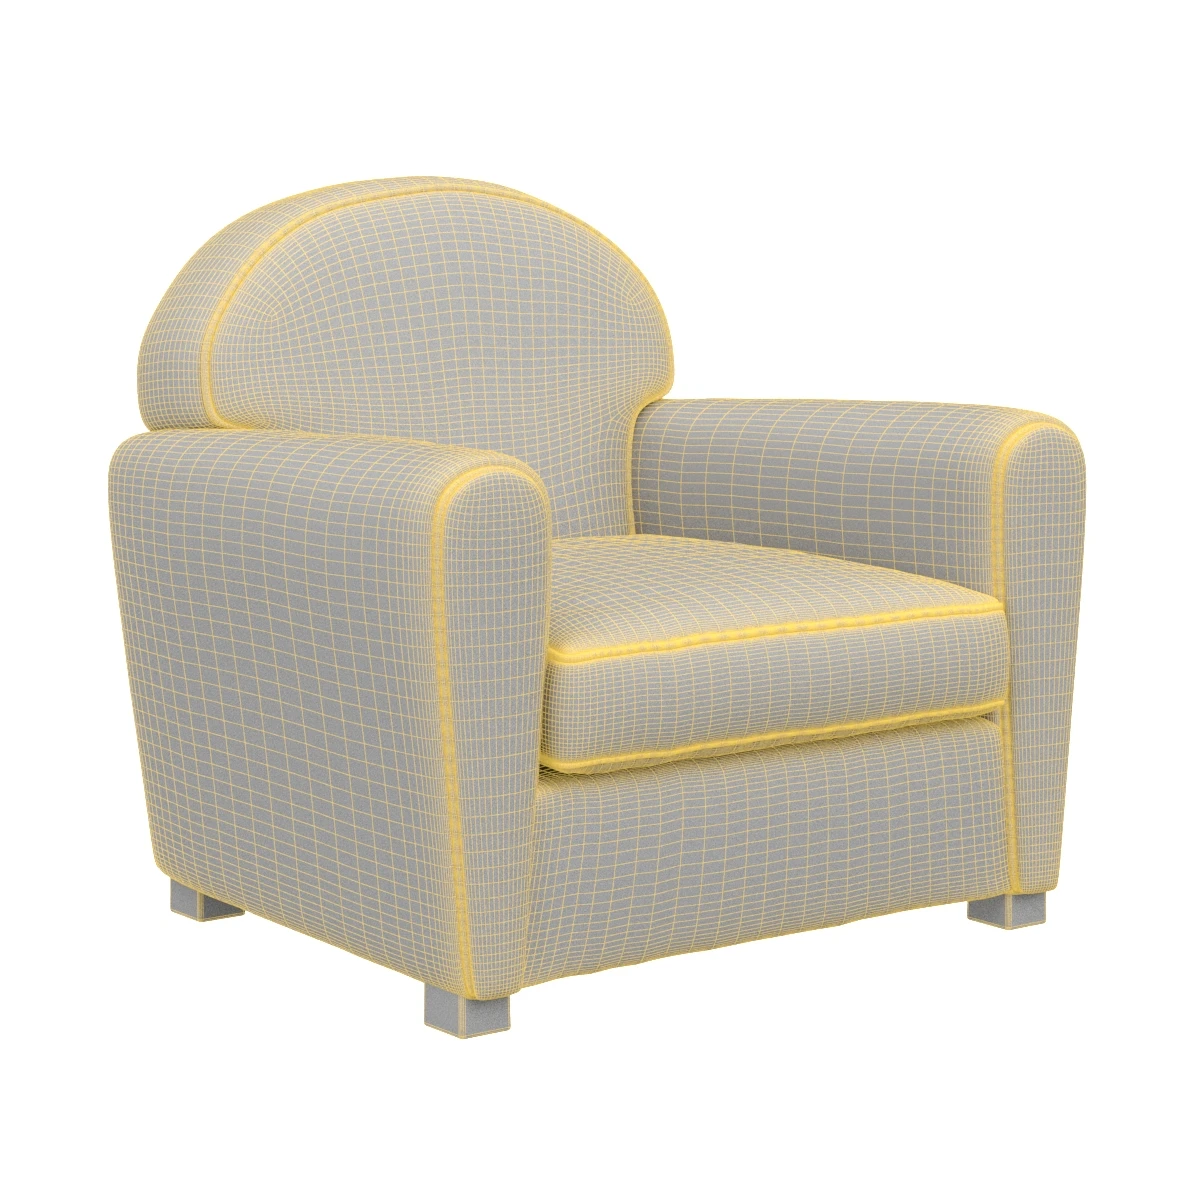 Vintage And Used Poltrona Frau Accent Chair 3D Model_07